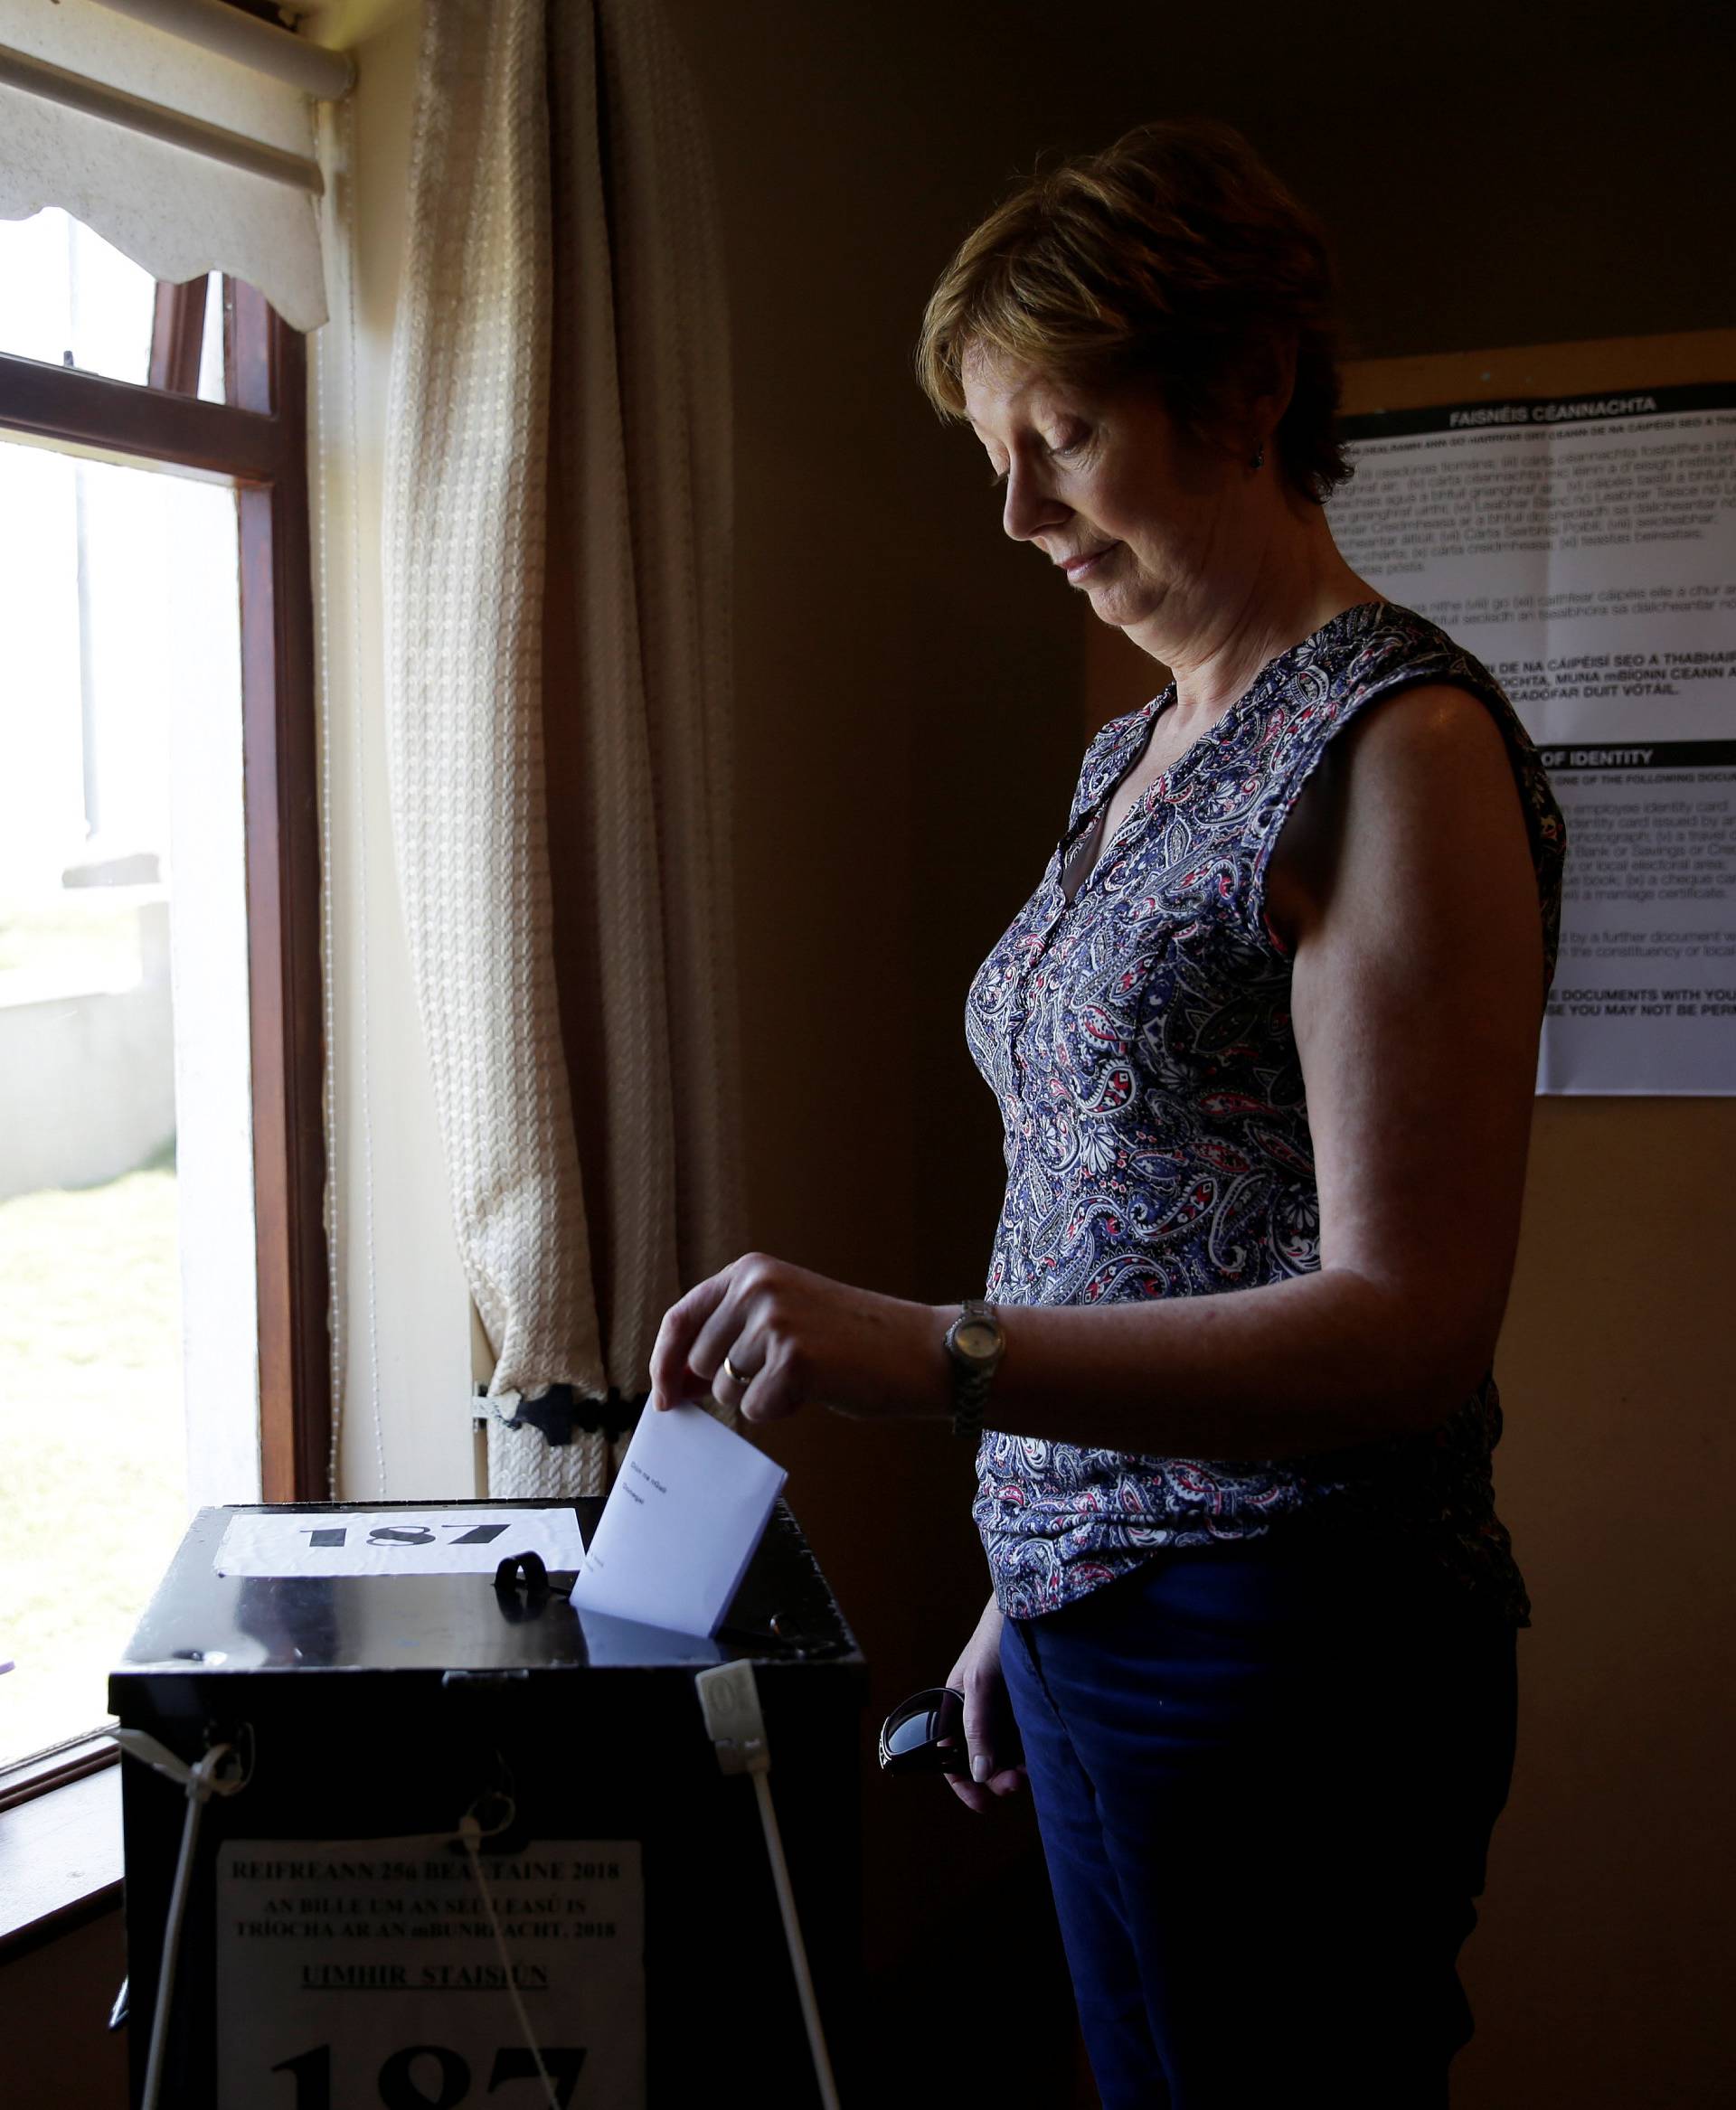 A woman casts her vote in Ireland's referendum on liberalizing abortion law, on Gola Island